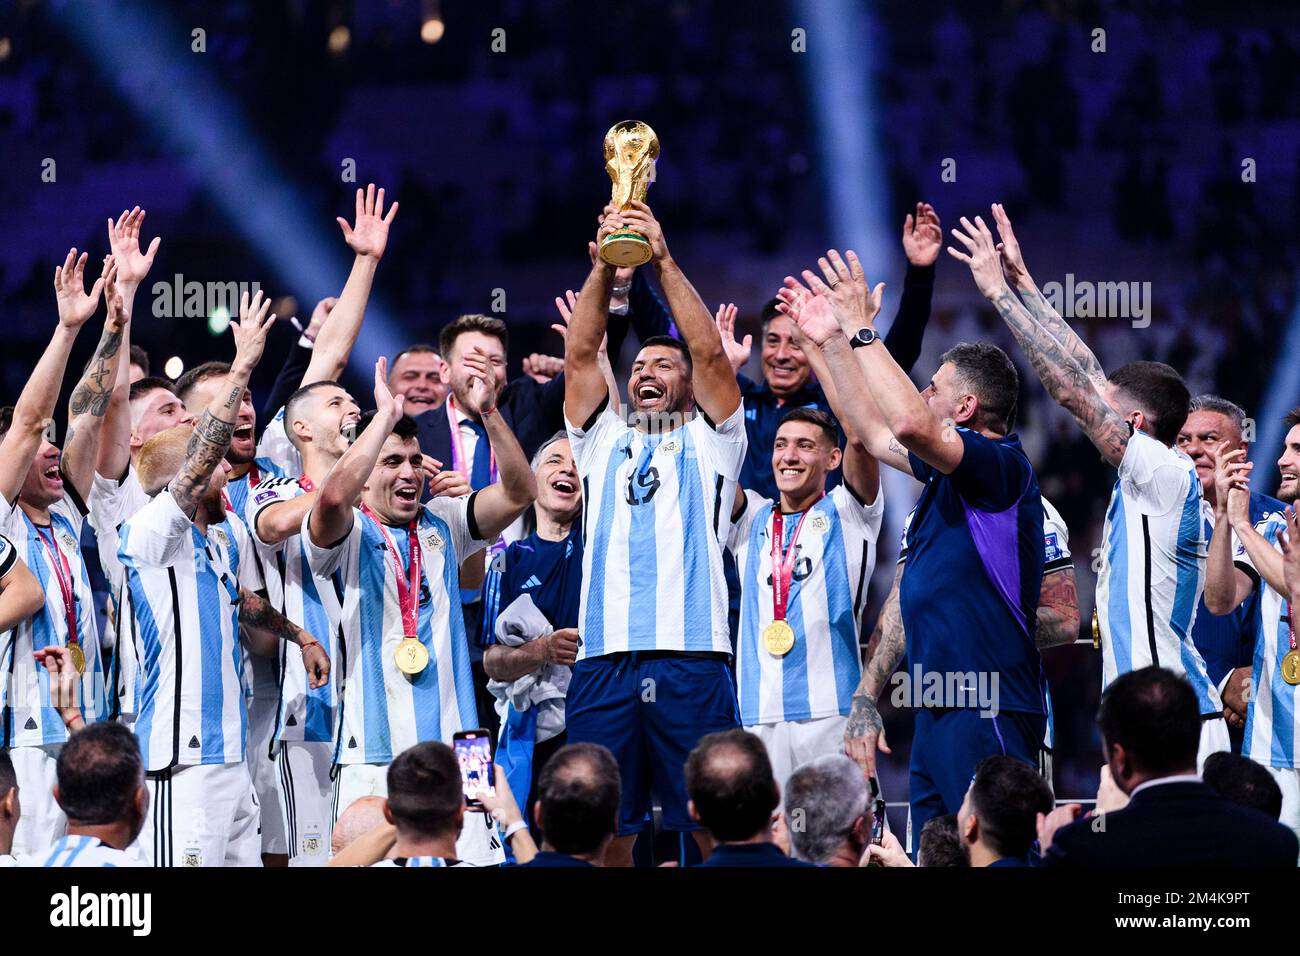 Lusail, Qatar. 18th Dec, 2022. Lusail Stadium Sergio 'Kun' Aguero and the Argentine Team celebrate with Copa after Argentina won the 2022 FIFA World Cup after winning a penalty shoot-out after the match between Argentina and France ended in a 3-3 draw valid for the 2022 FIFA World Cup final held at the Stadium Lusail International, AD, Qatar (Marcio Machado/SPP) Credit: SPP Sport Press Photo. /Alamy Live News Stock Photo